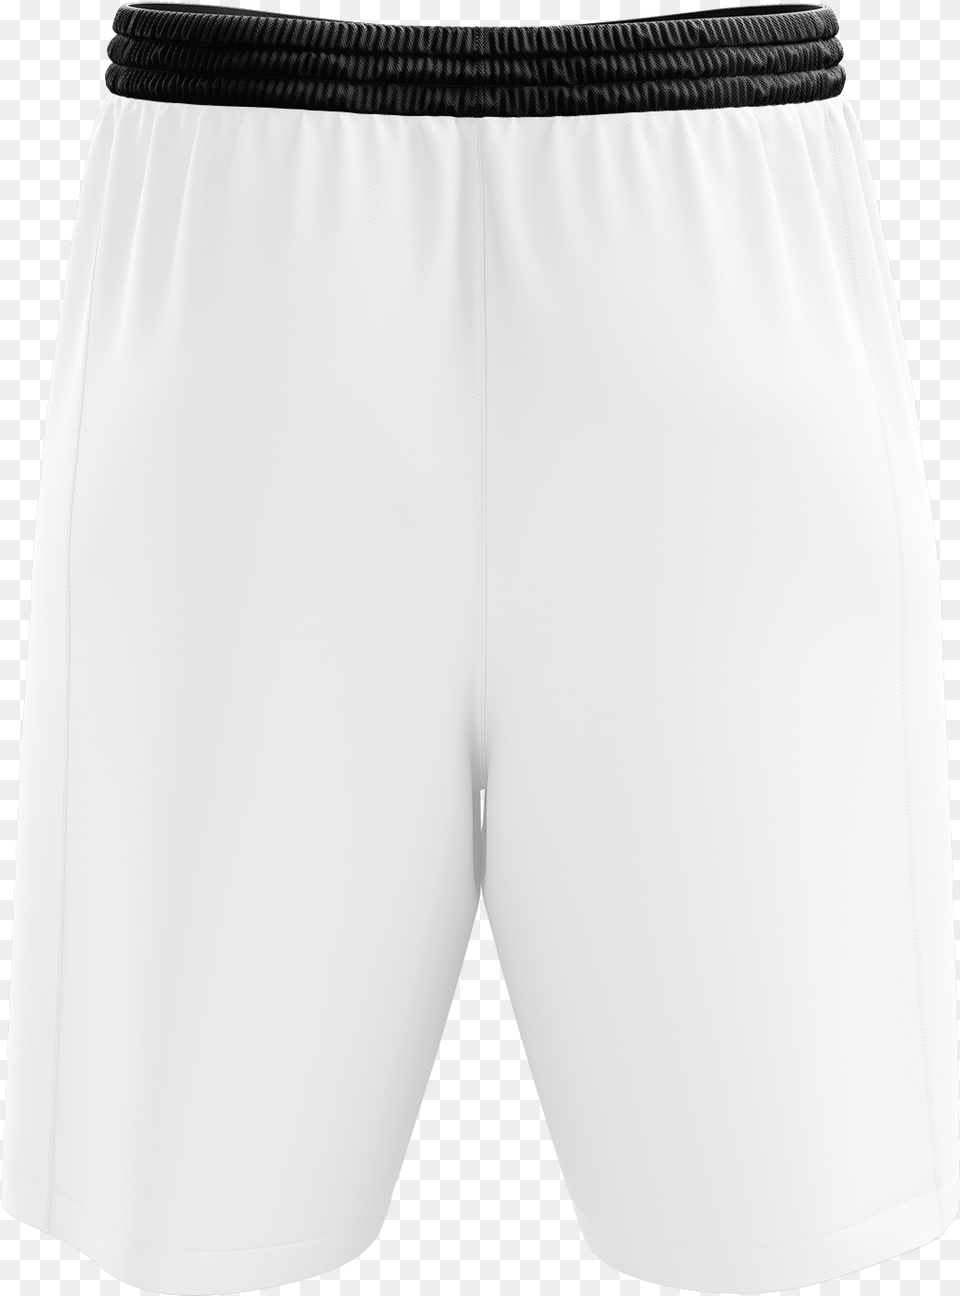 Board Short, Clothing, Shorts, Swimming Trunks Png Image